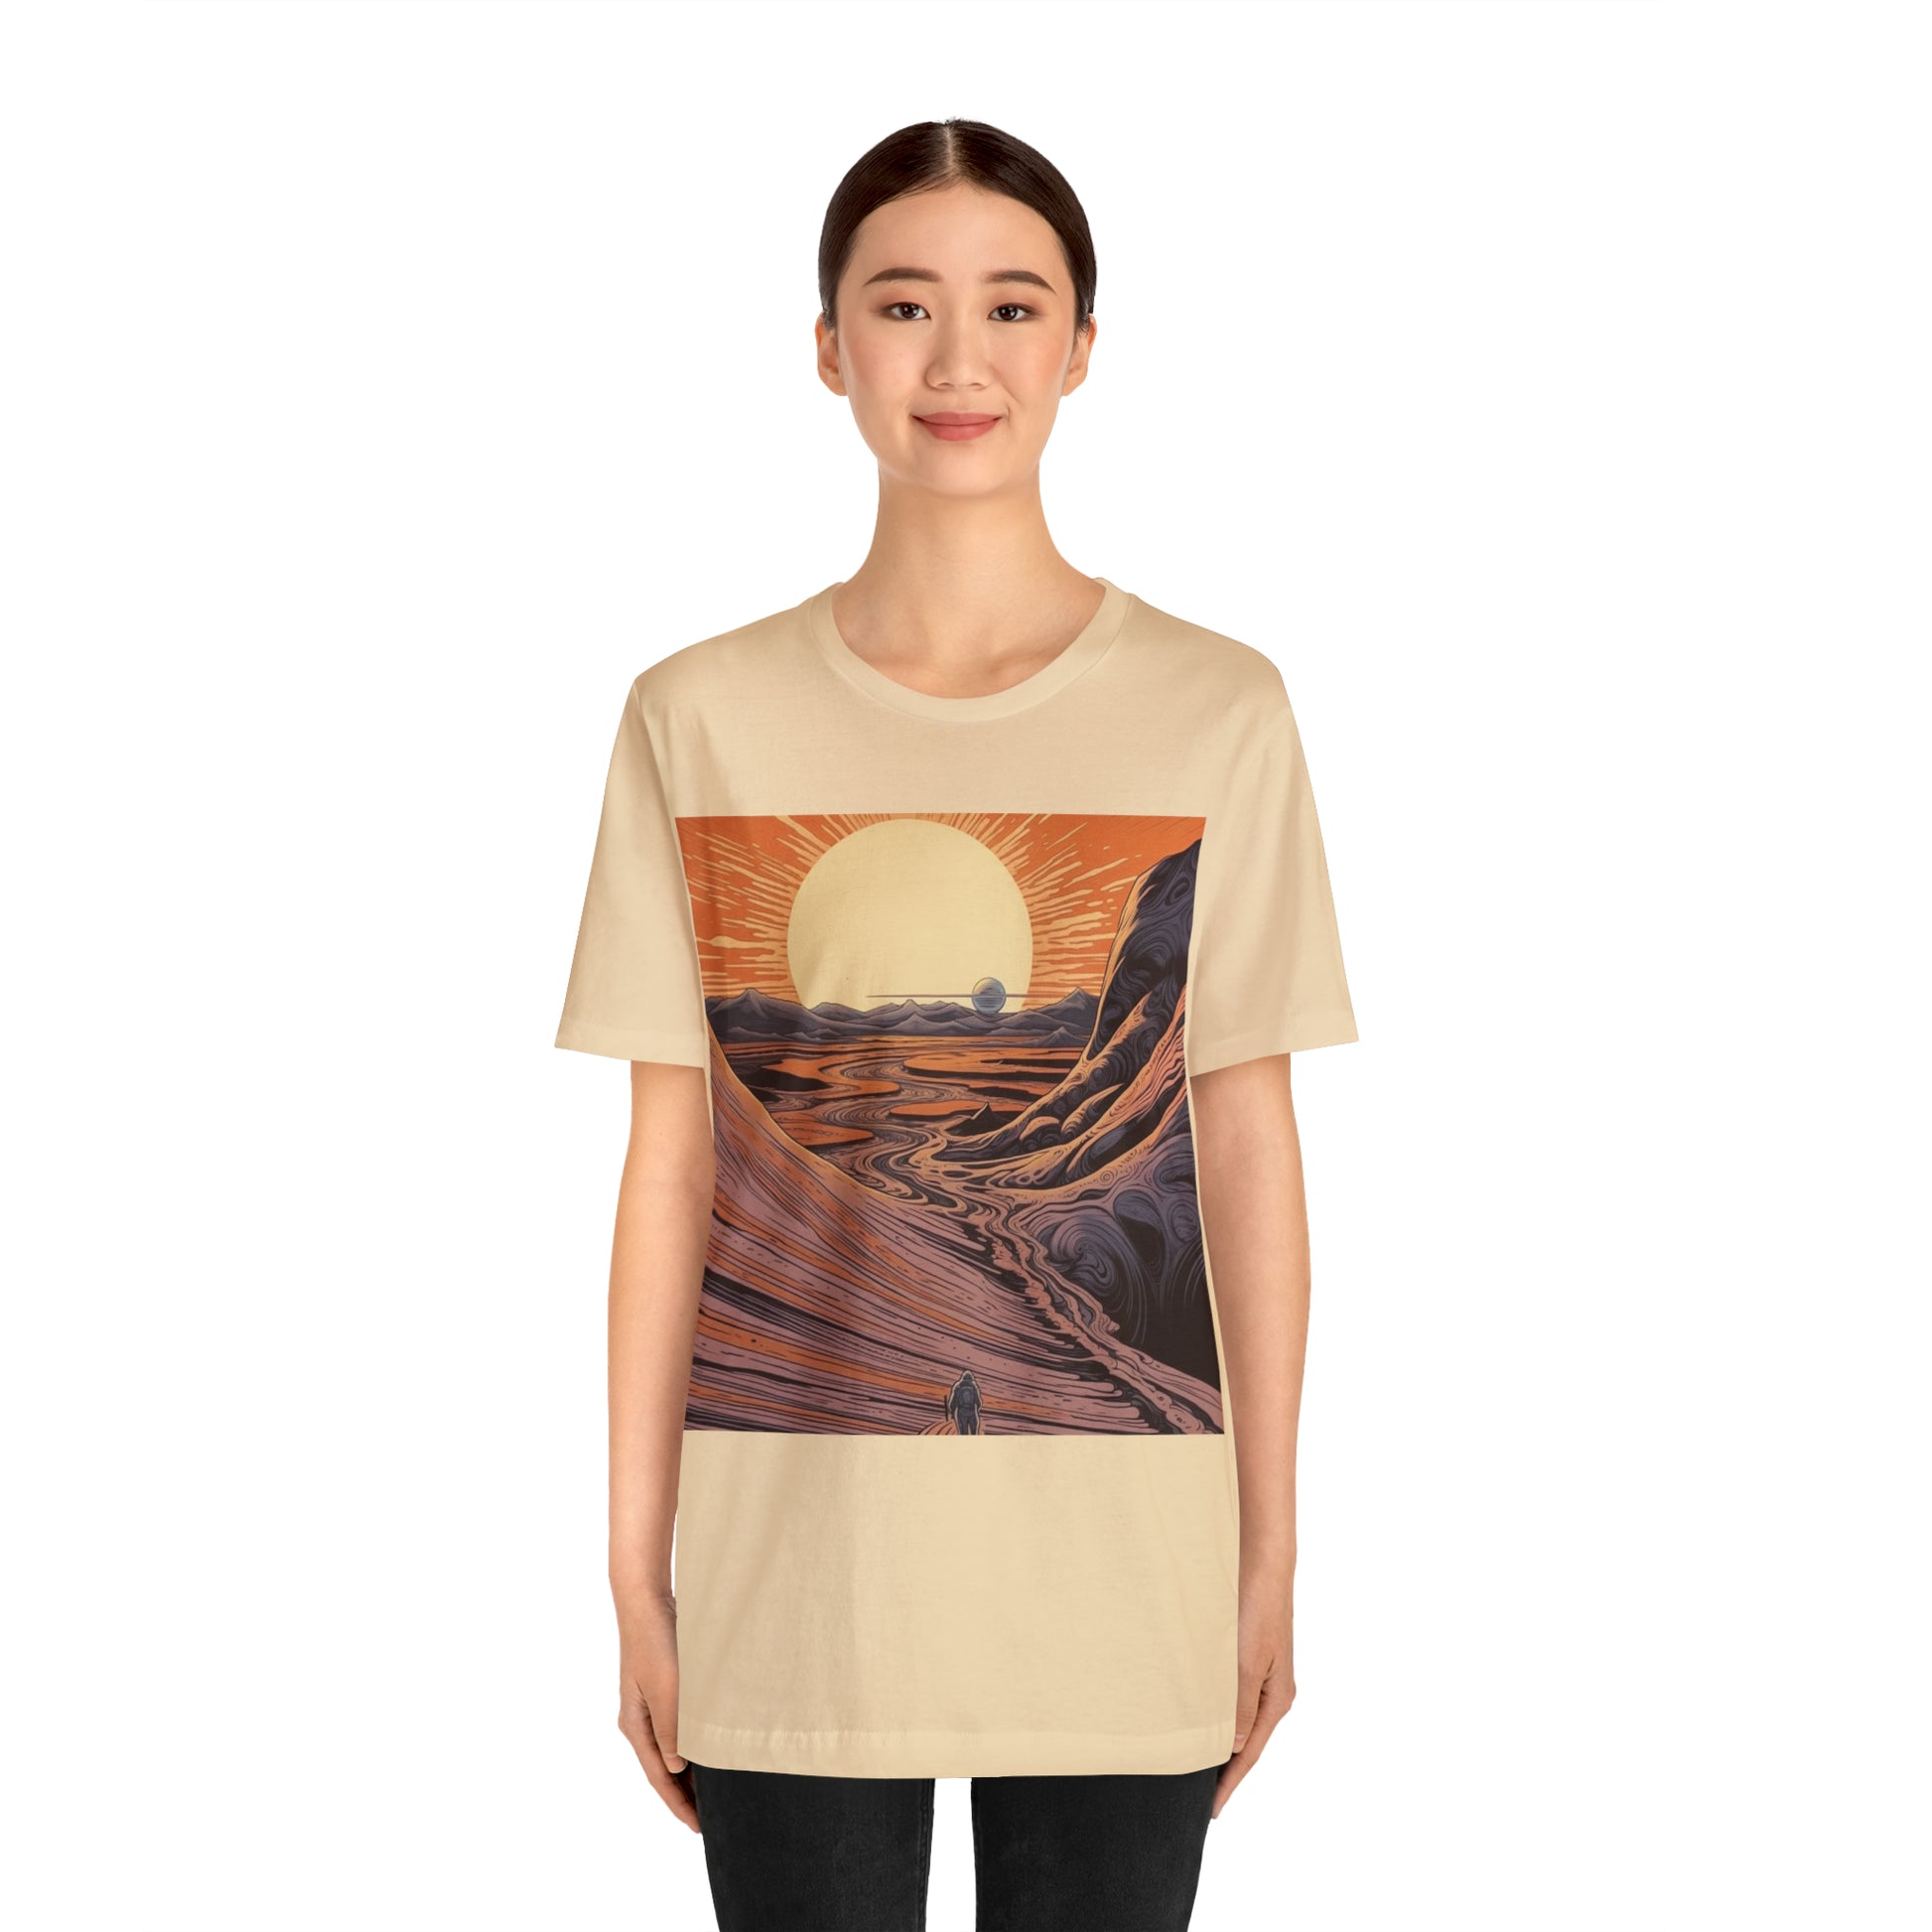 soft-cream-quest-thread-tee-shirt-with-large-sunrise-over-dunes-on-center-of-shirt